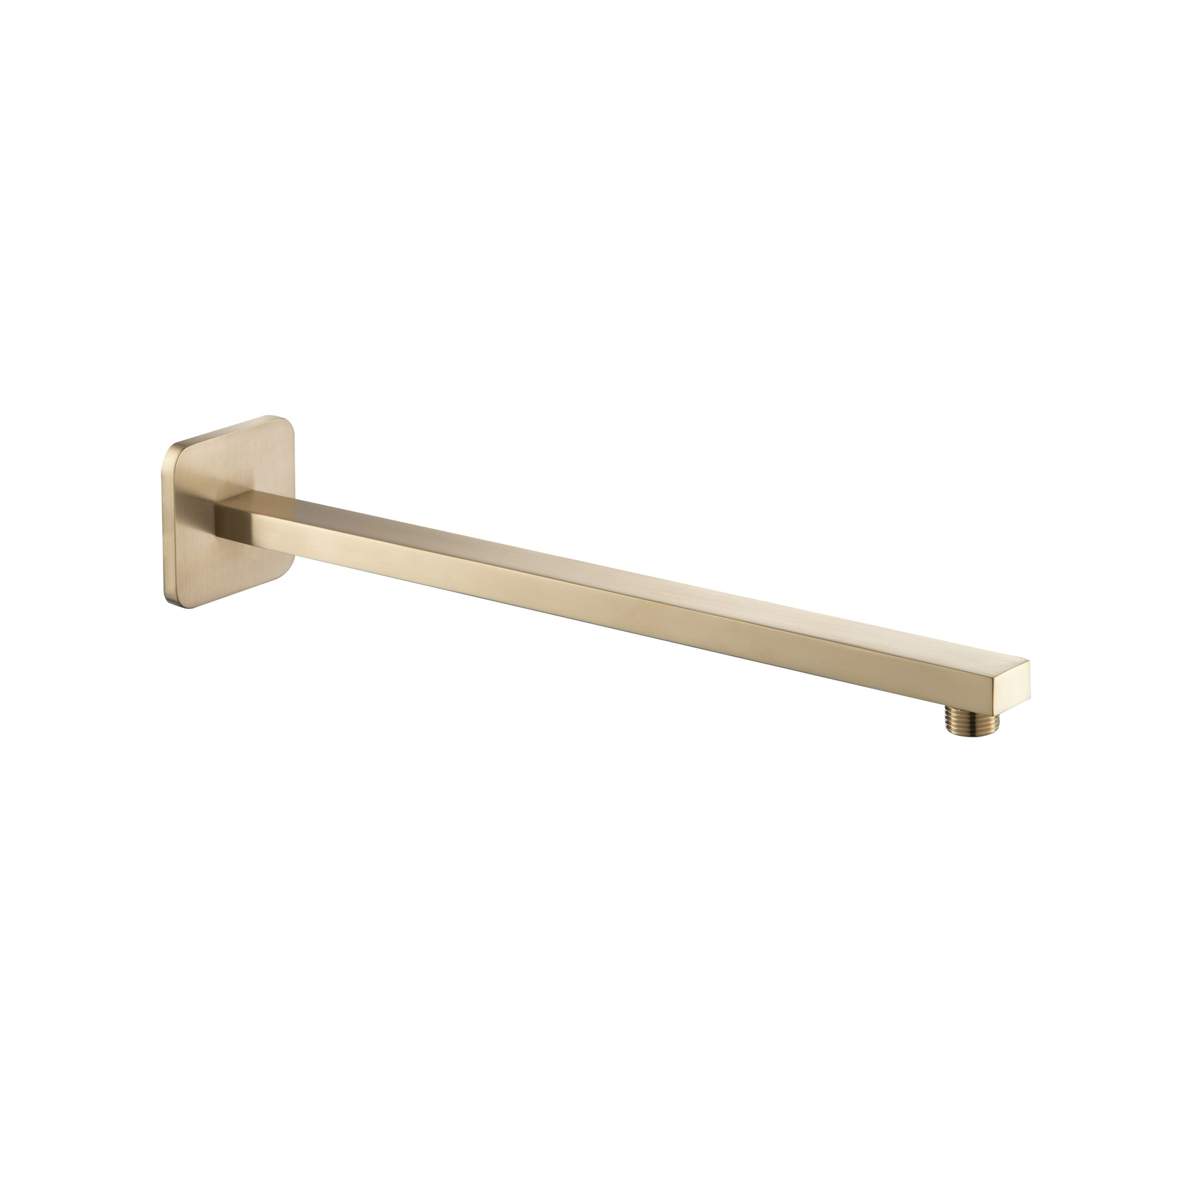 JTP Hix Brushed Brass Wall Mounted Shower Arm (3321380BBR)